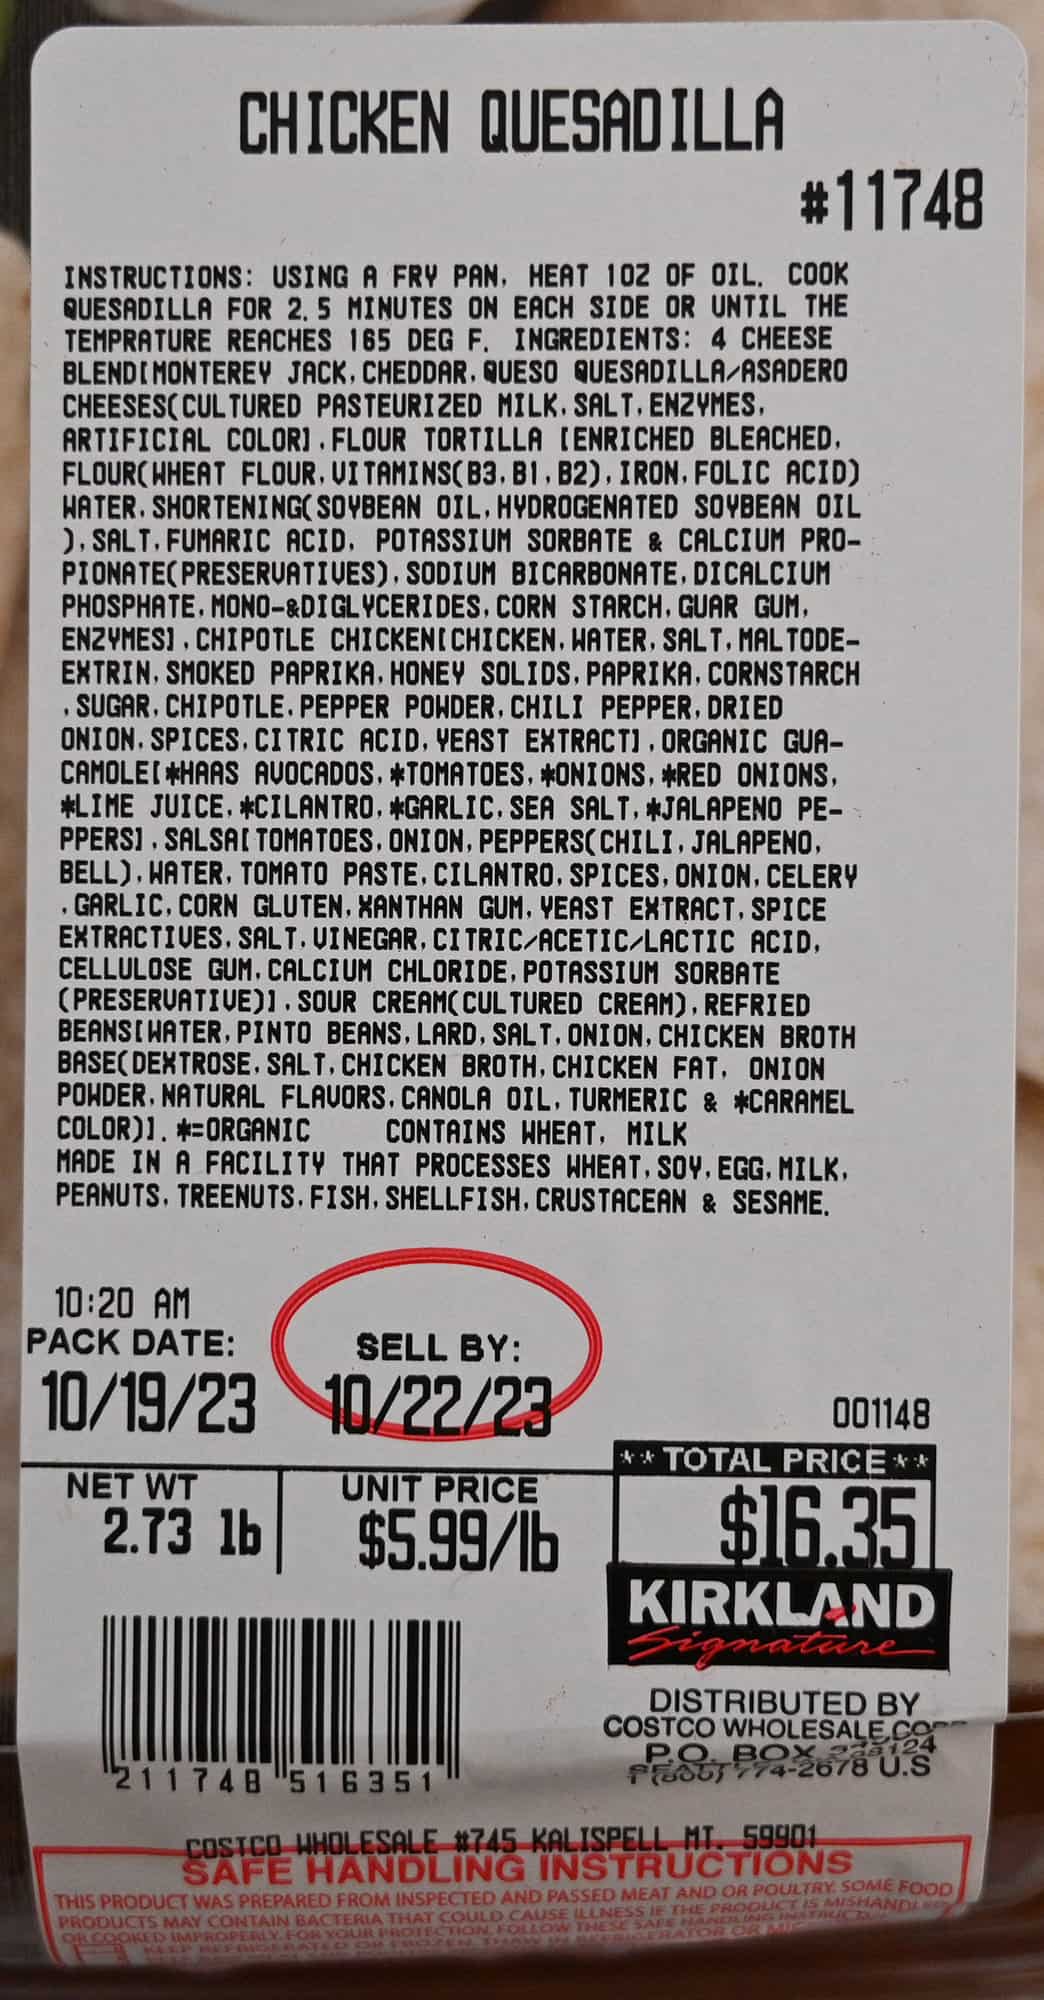 Closeup image of the front label on the quesadillas with the price, ingredients and best before date.